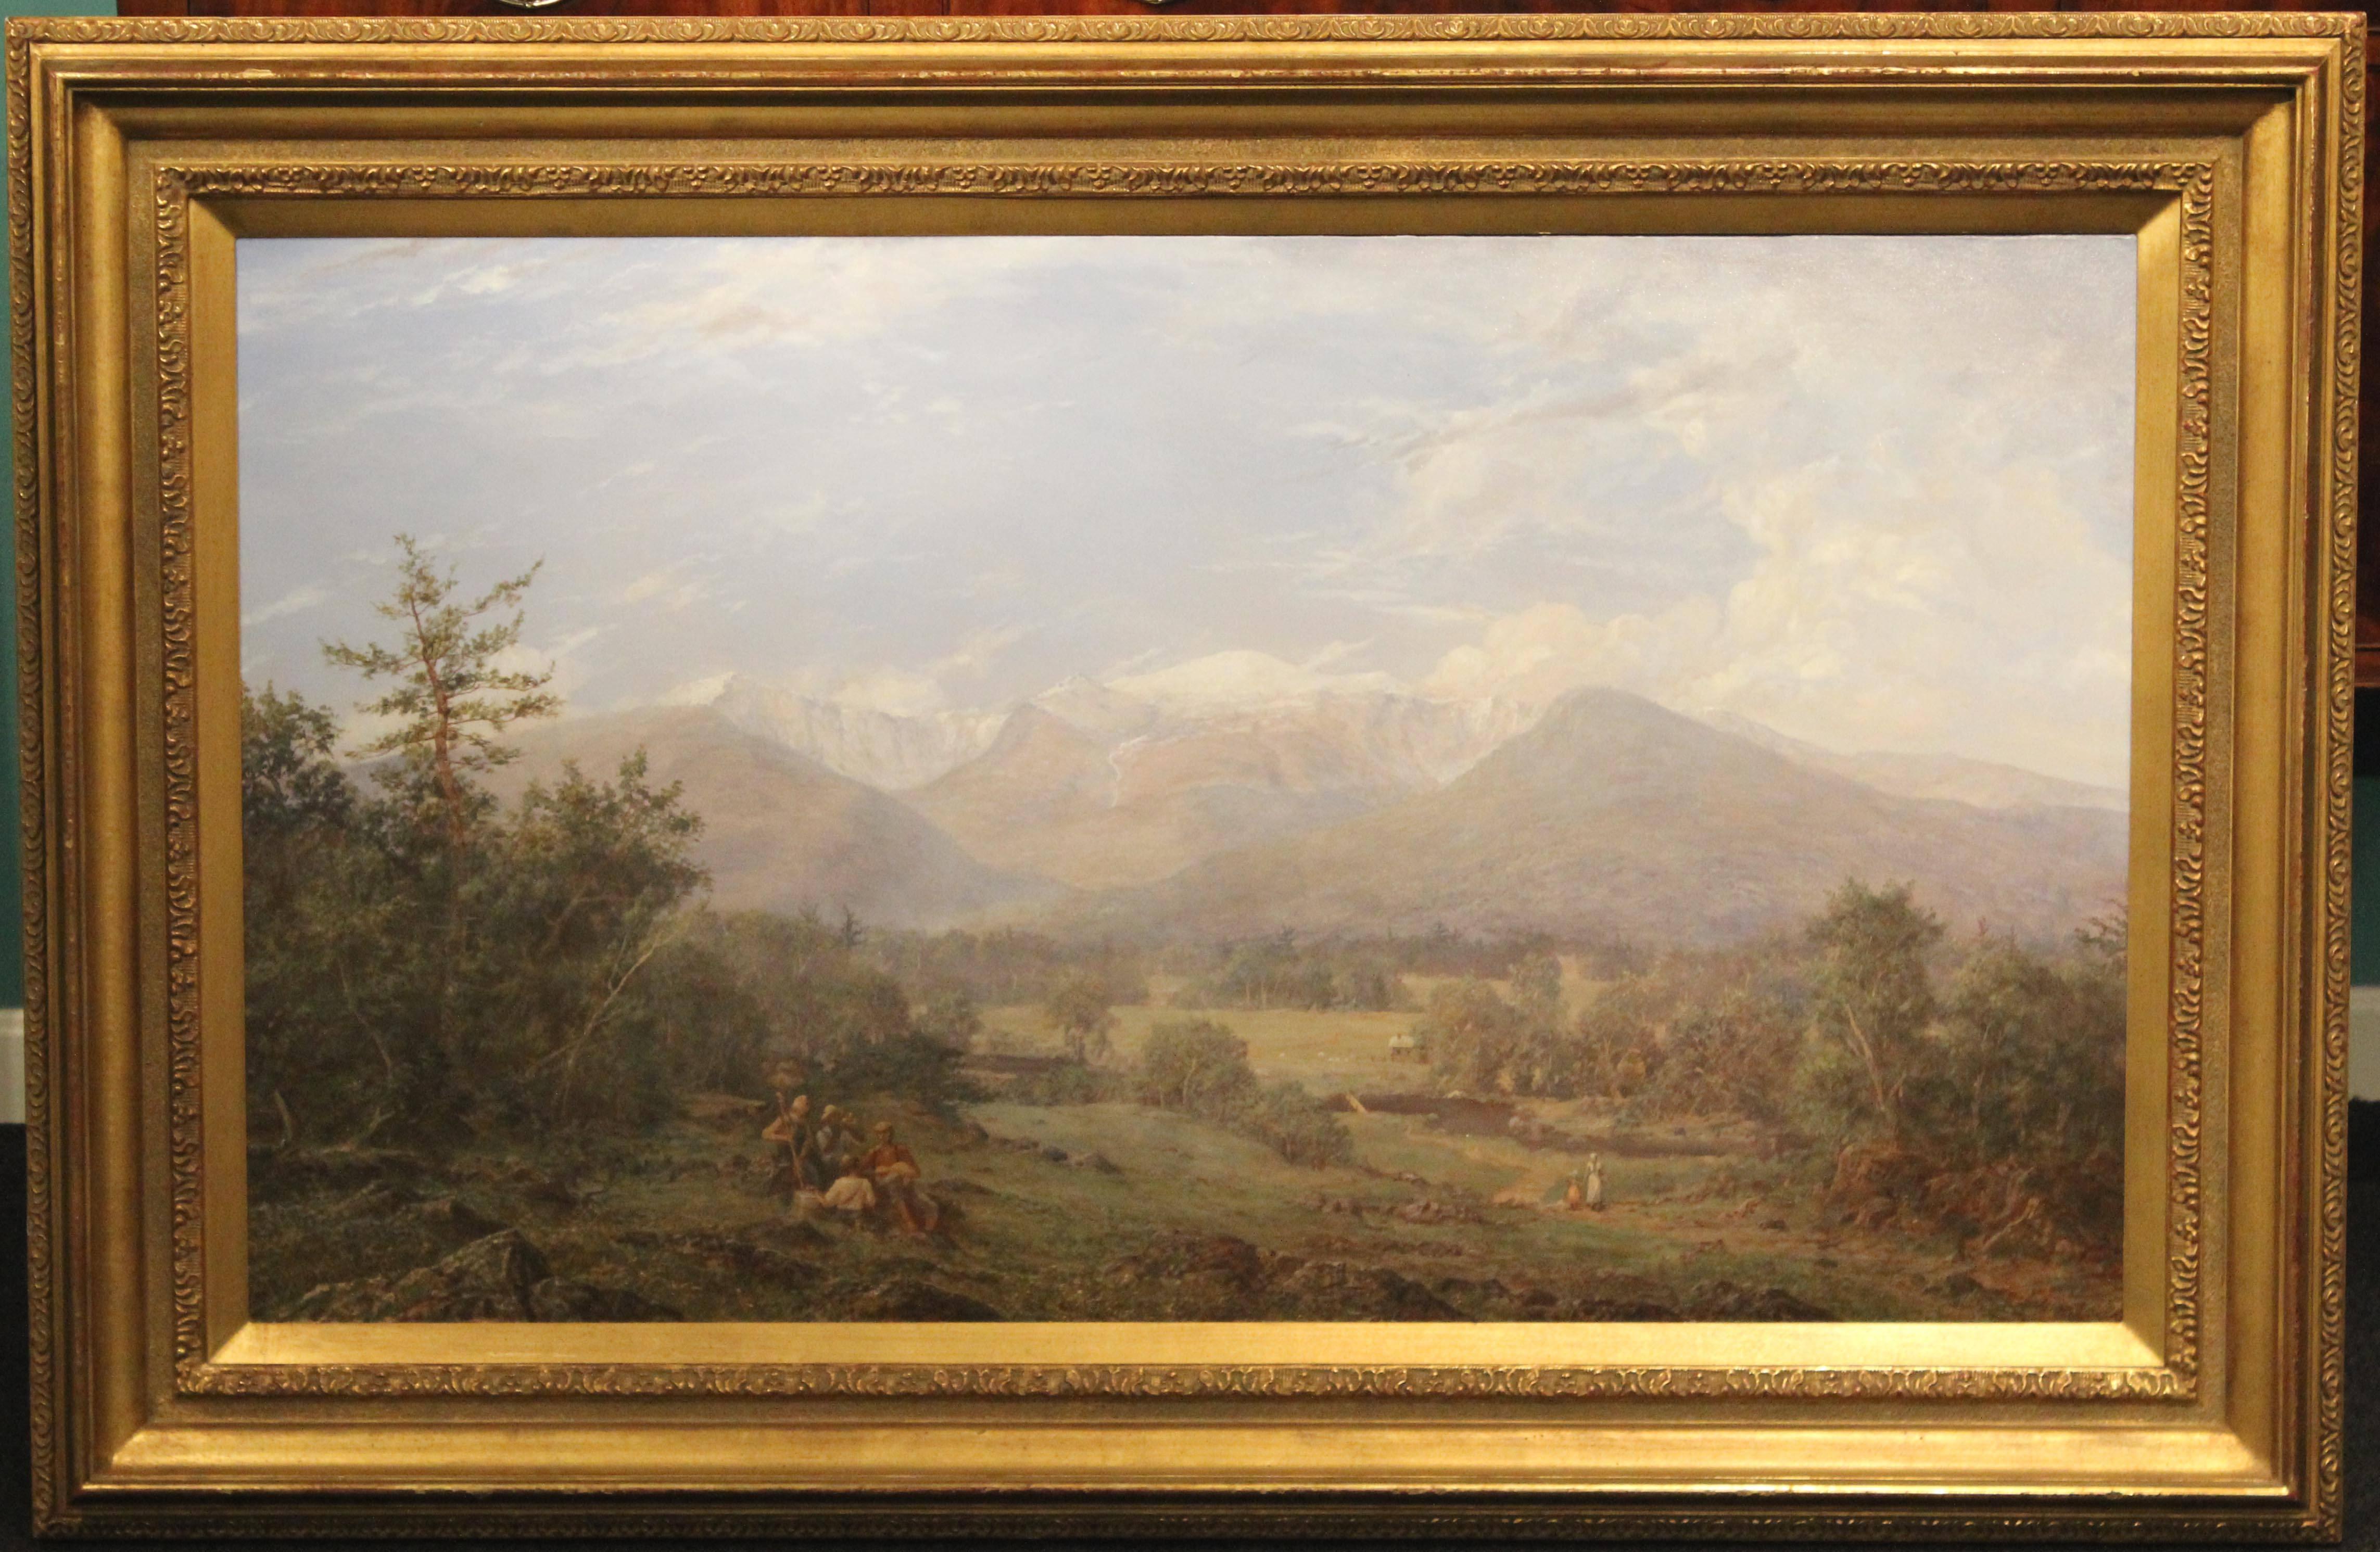 This large nicely detailed New Hampshire White Mountains oil painting of Mt. Washington was done by contemporary American artist Erik Koeppel (1980-). Koeppel was born in Oregon and later settled in the White Mountains of New Hampshire, where he has